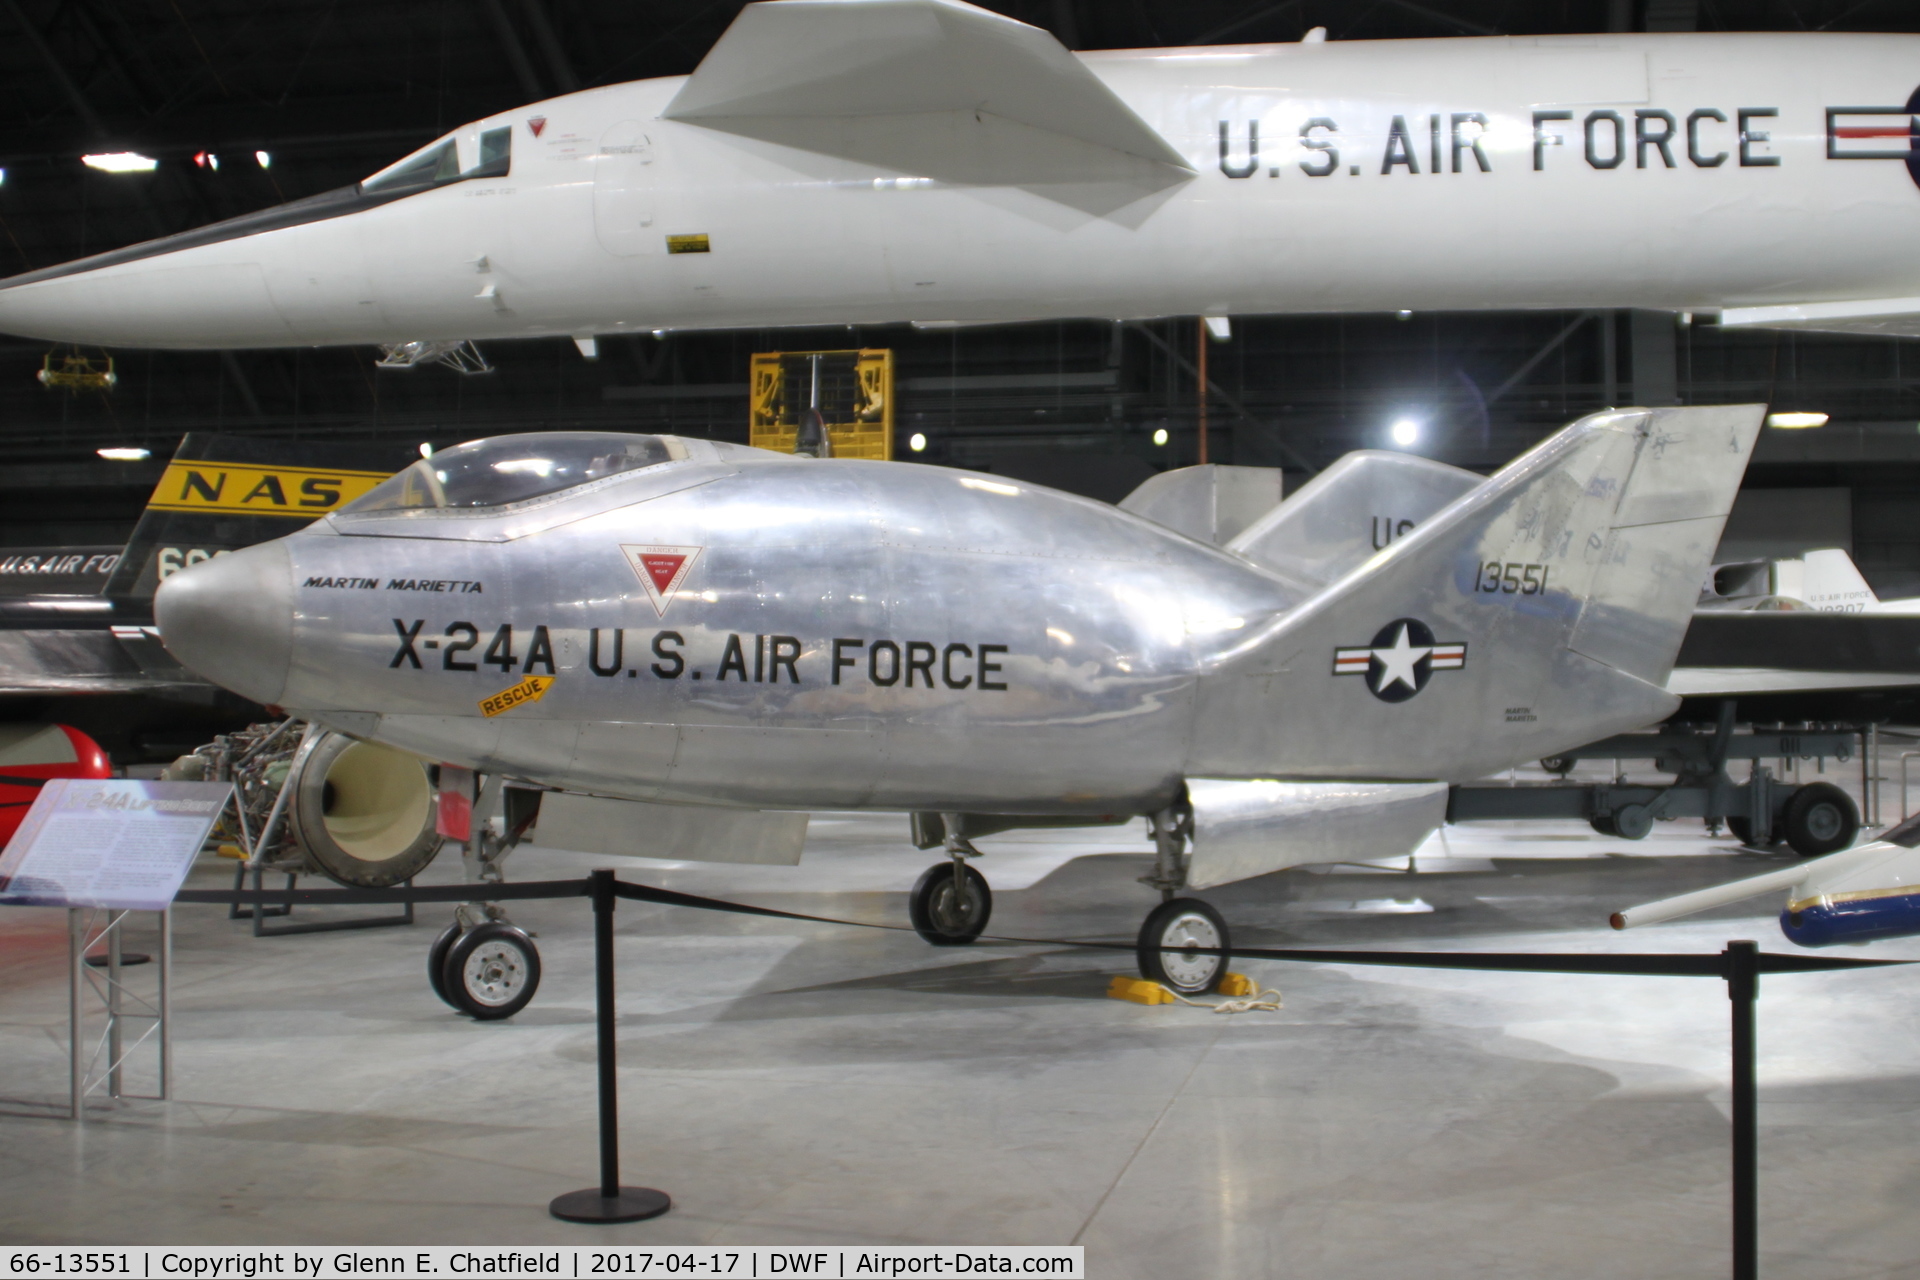 66-13551, Martin Marietta X-24A (SV-5J) C/N 2, SV-5J modified to look like an X-24A. Development aircraft for the X-24 program. Located now at the National Museum of the U.S. Air Force. S/N is bogus.